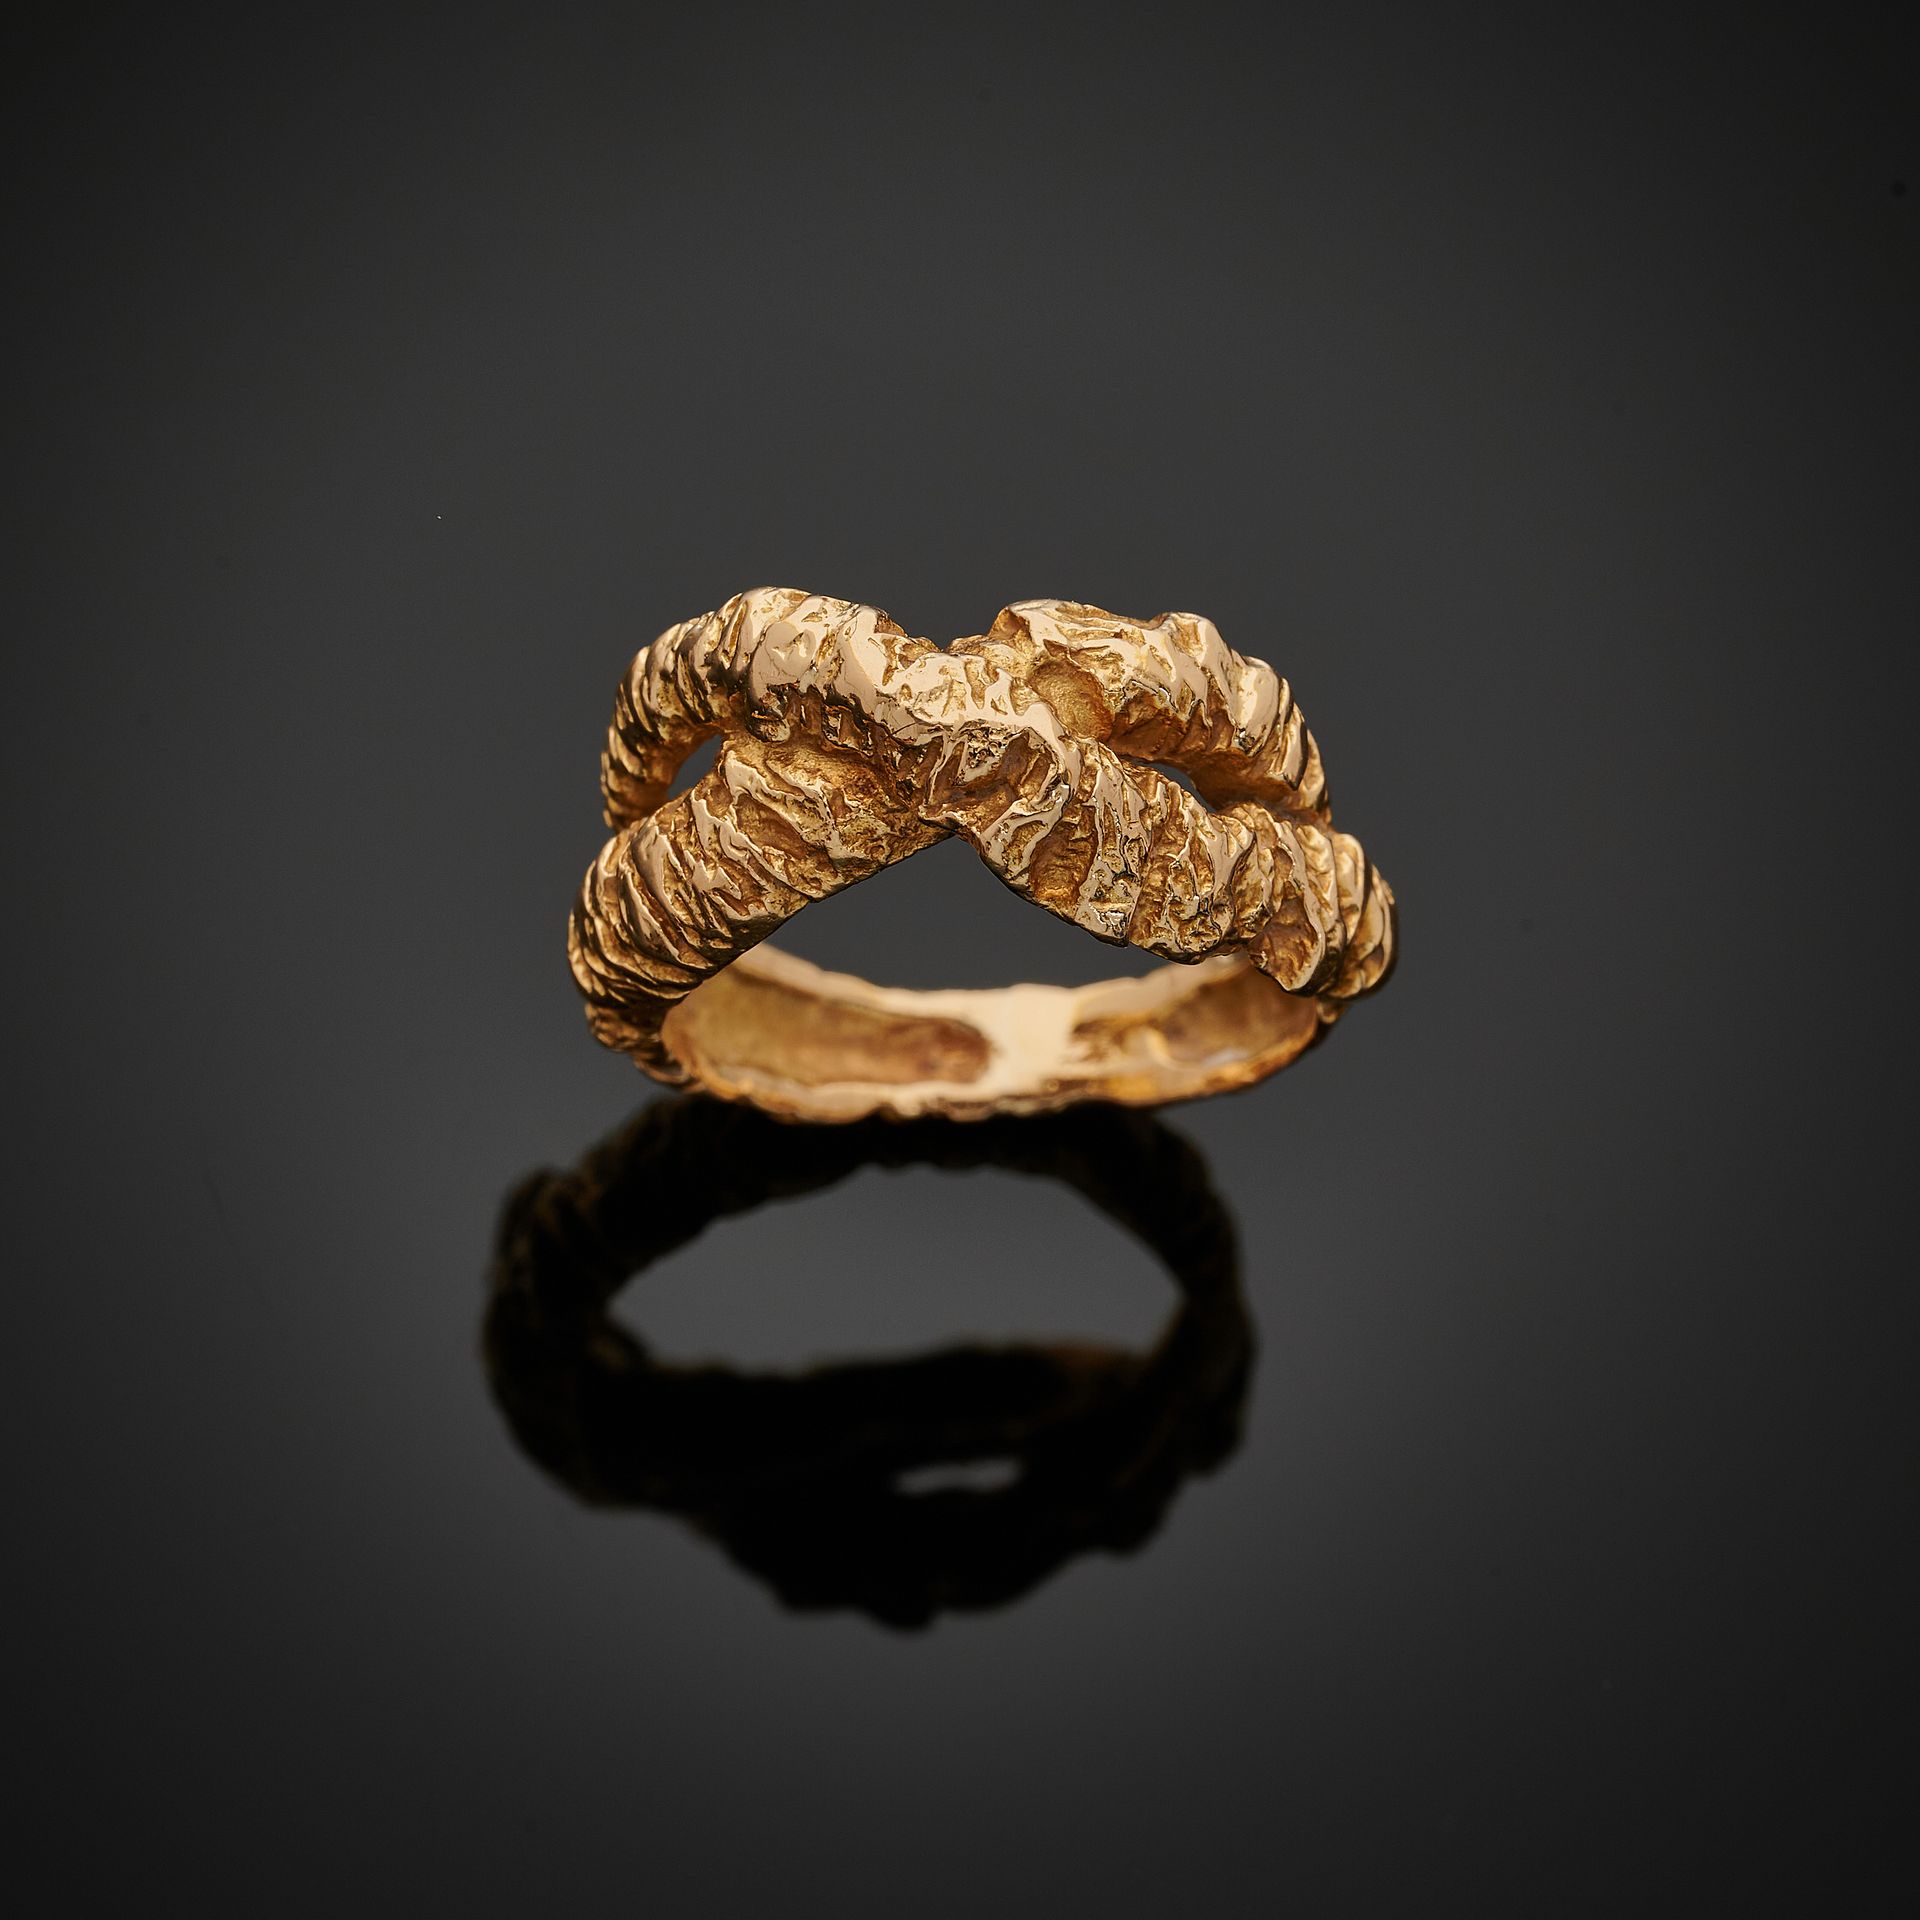 Null Yellow gold ring 750 mm of type entrelac textured.
TDD: 53
NET weight: 7,1g